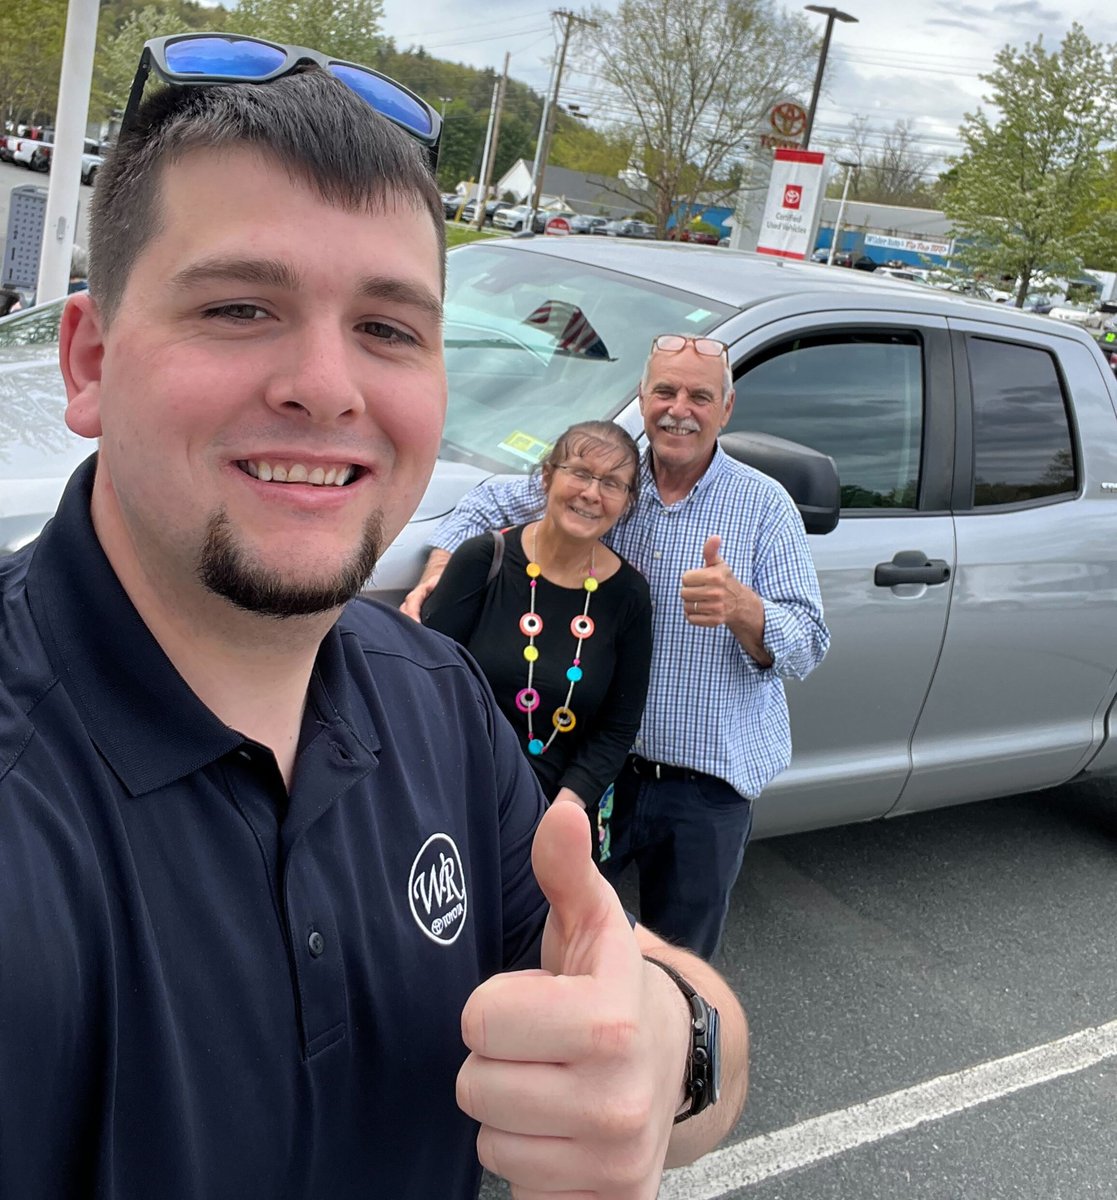 Happy #NewTruckDay to Toni and Richard! They brought home this thumbs-up worthy 2019 @Toyota Tundra, thanks to some help from Tyler Gillis - Congrats!

Learn more about Tyler & check out his reviews on @DealerRater: bit.ly/4aXbyvL

#Toyota #LetsGoPlaces #Tundra